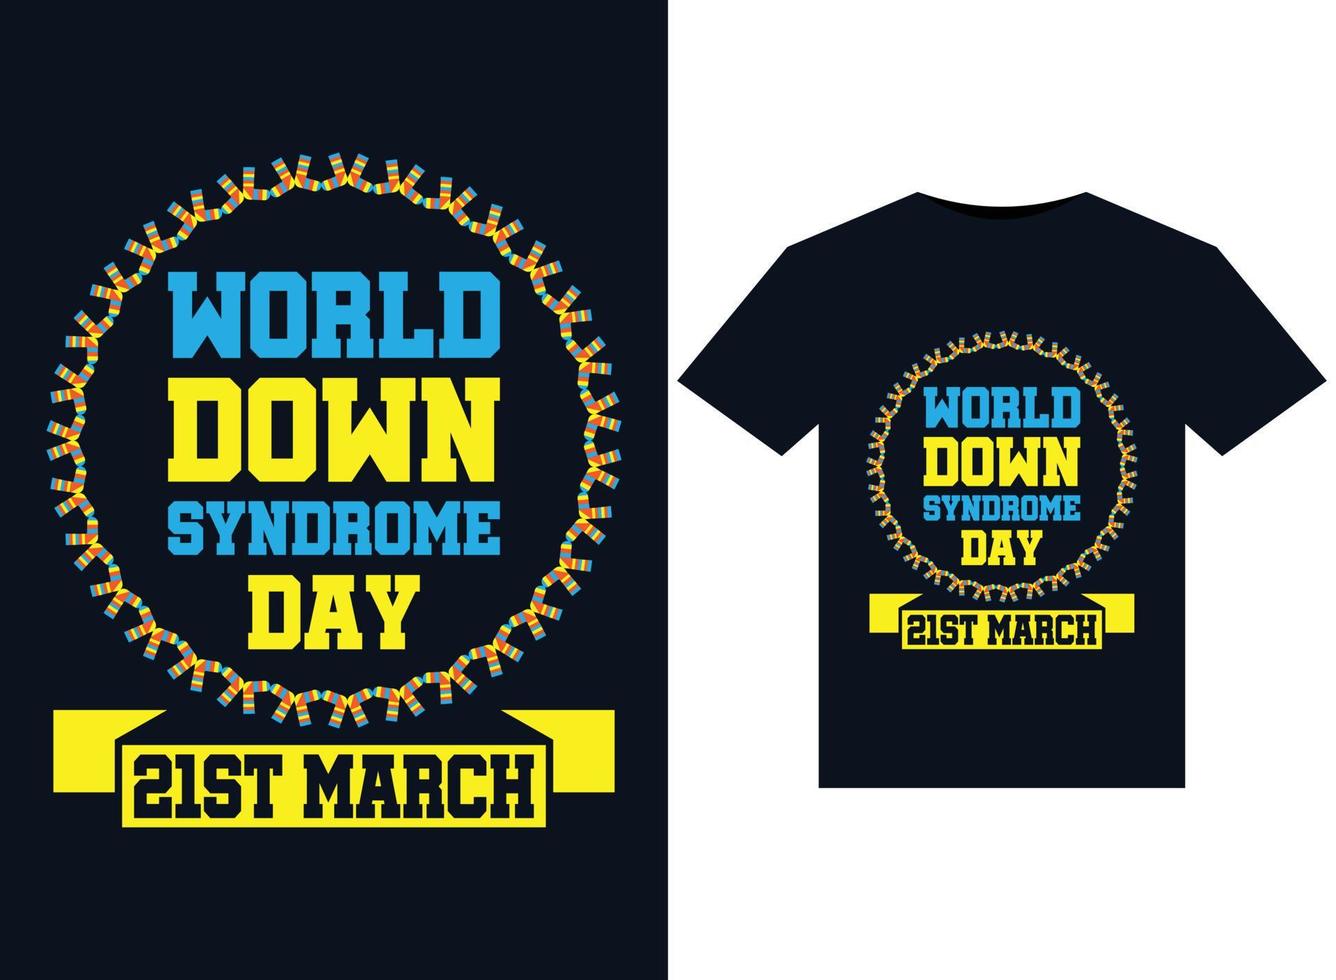 World Down Syndrome Day 21st March illustrations for print-ready T-Shirts design vector